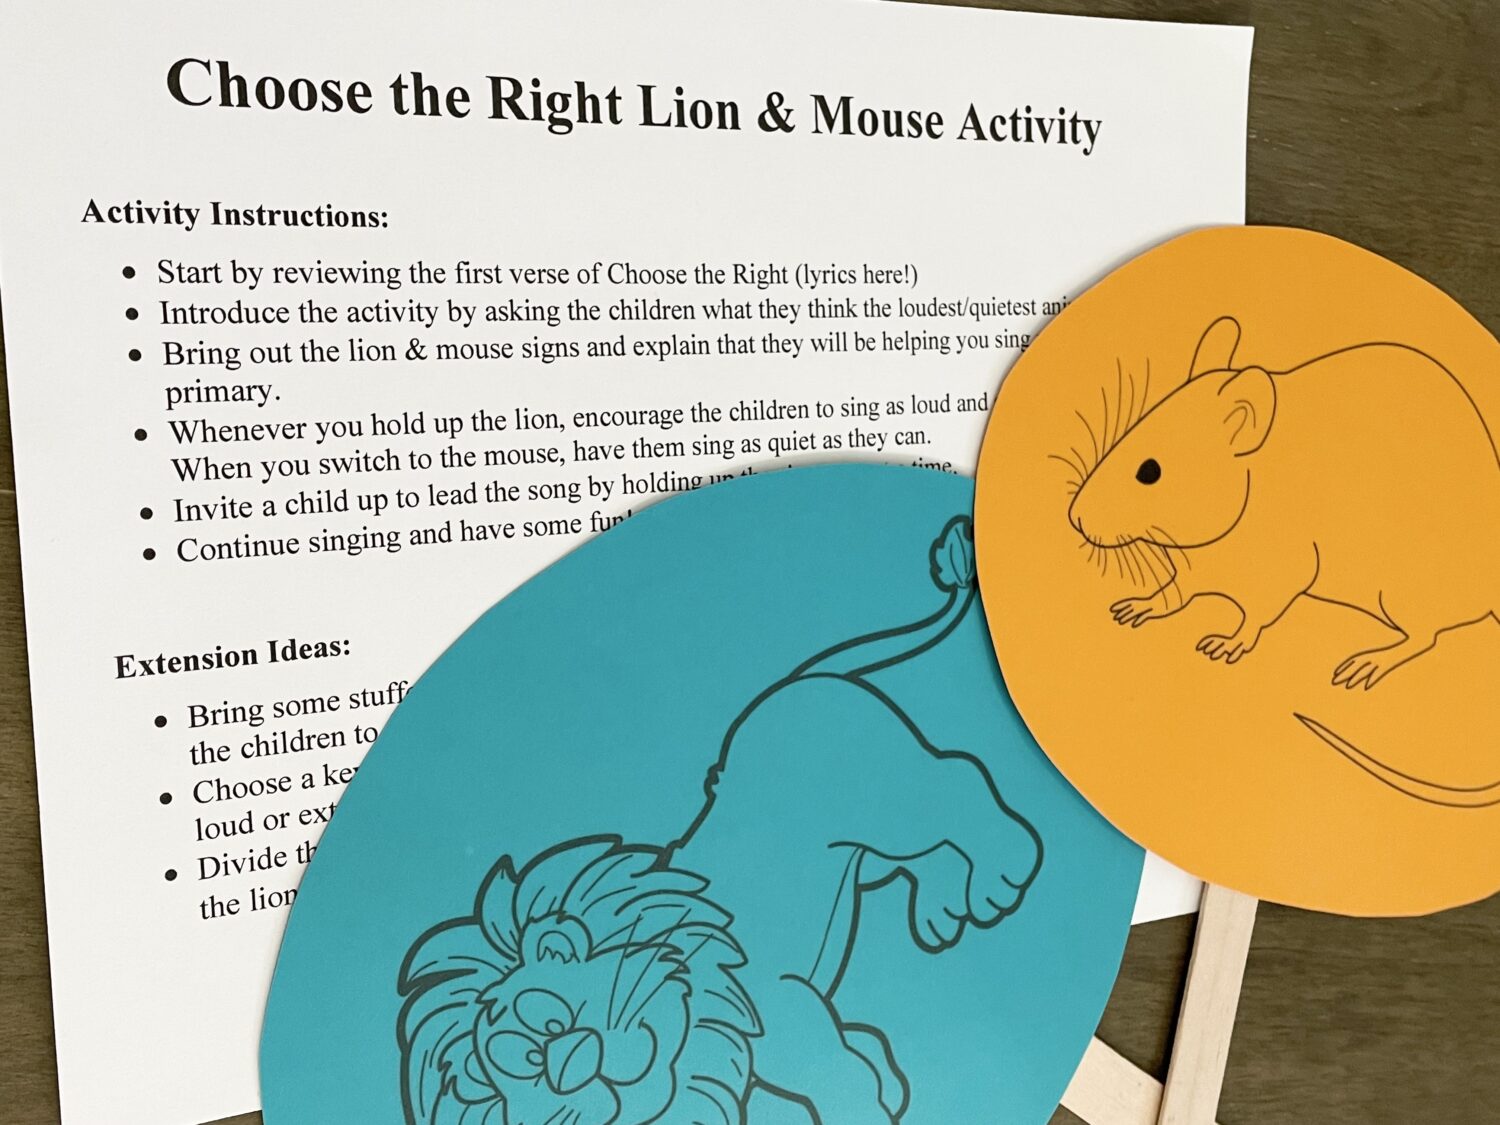 Choose the Right Lion & Mouse singing time ideas for LDS Primary music leaders. Grab these adorable printable song helps of a lion and a mouse to teach with using loud and soft singing!